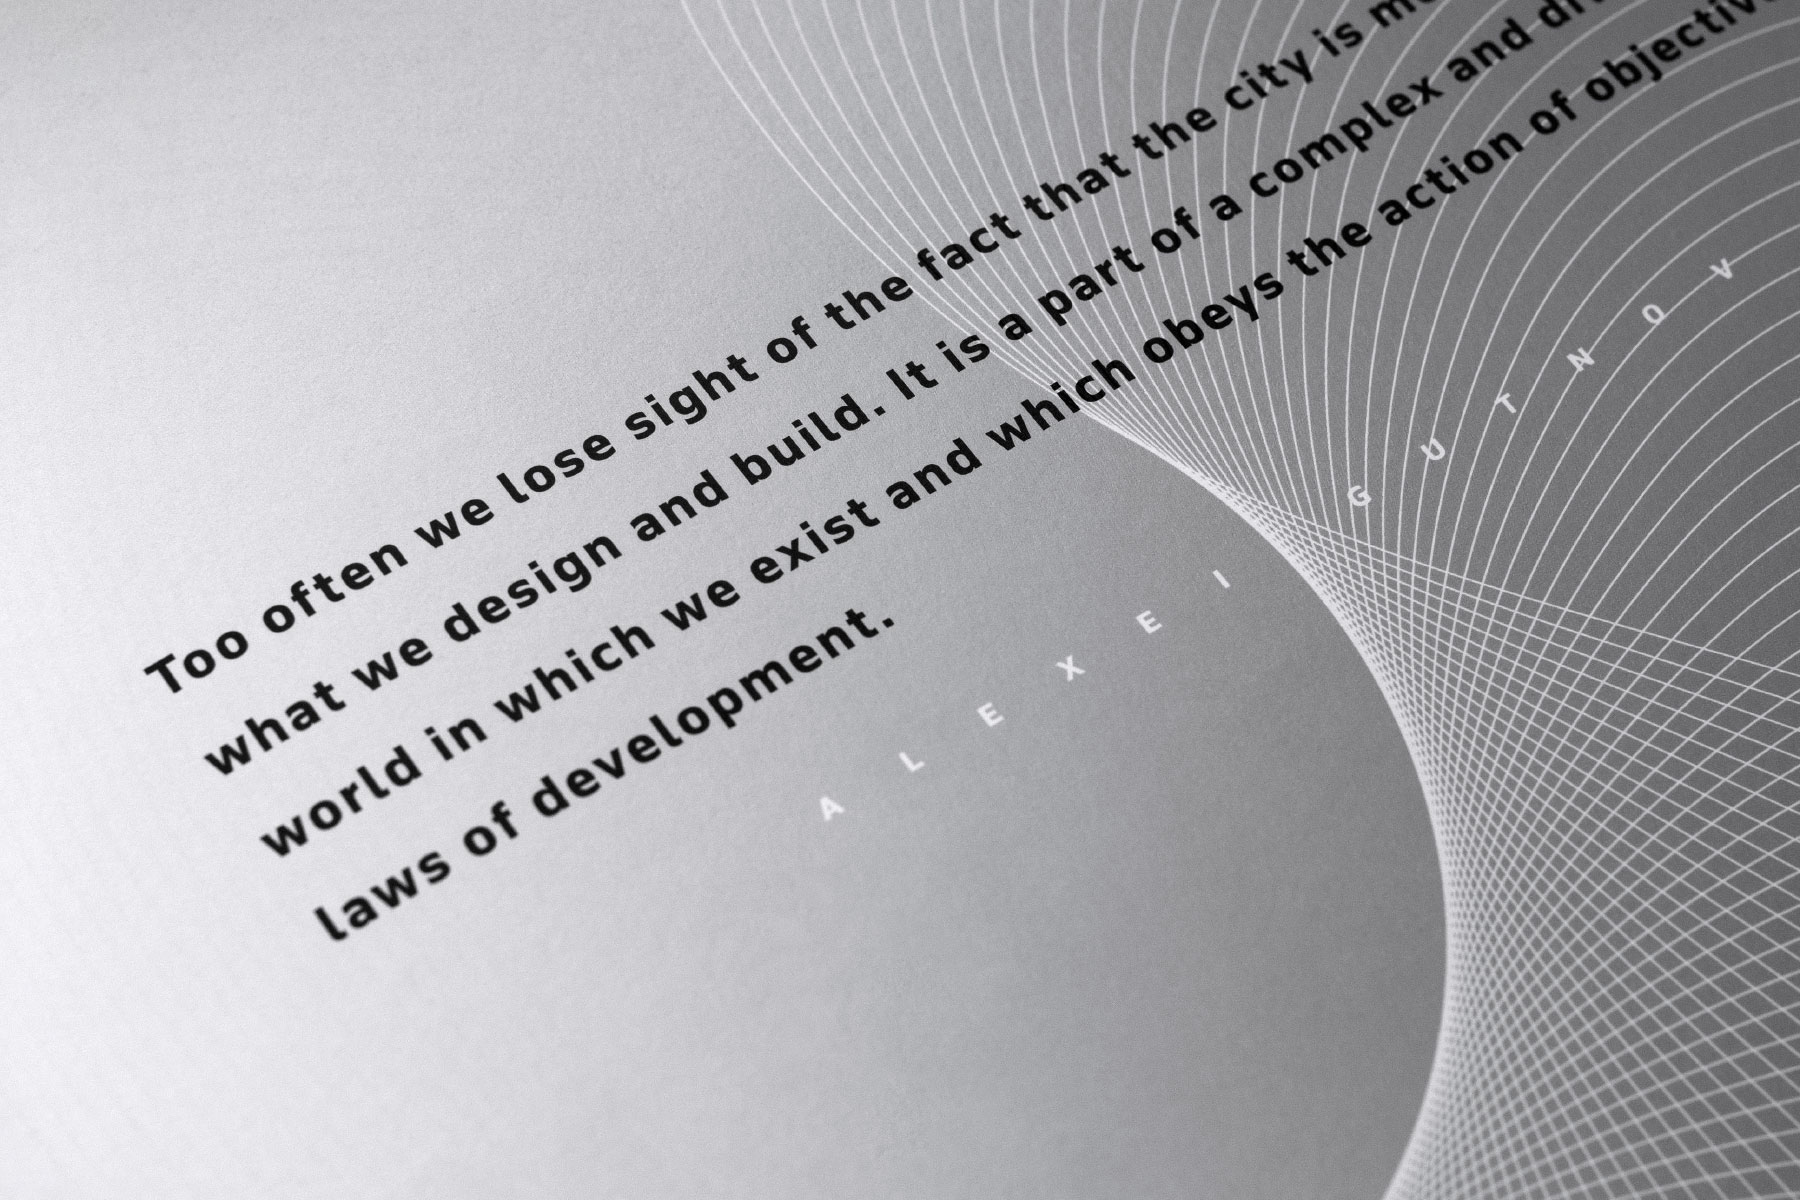 City of the Future book spread showing a quotation infront of a silver background and organic pattern of lines